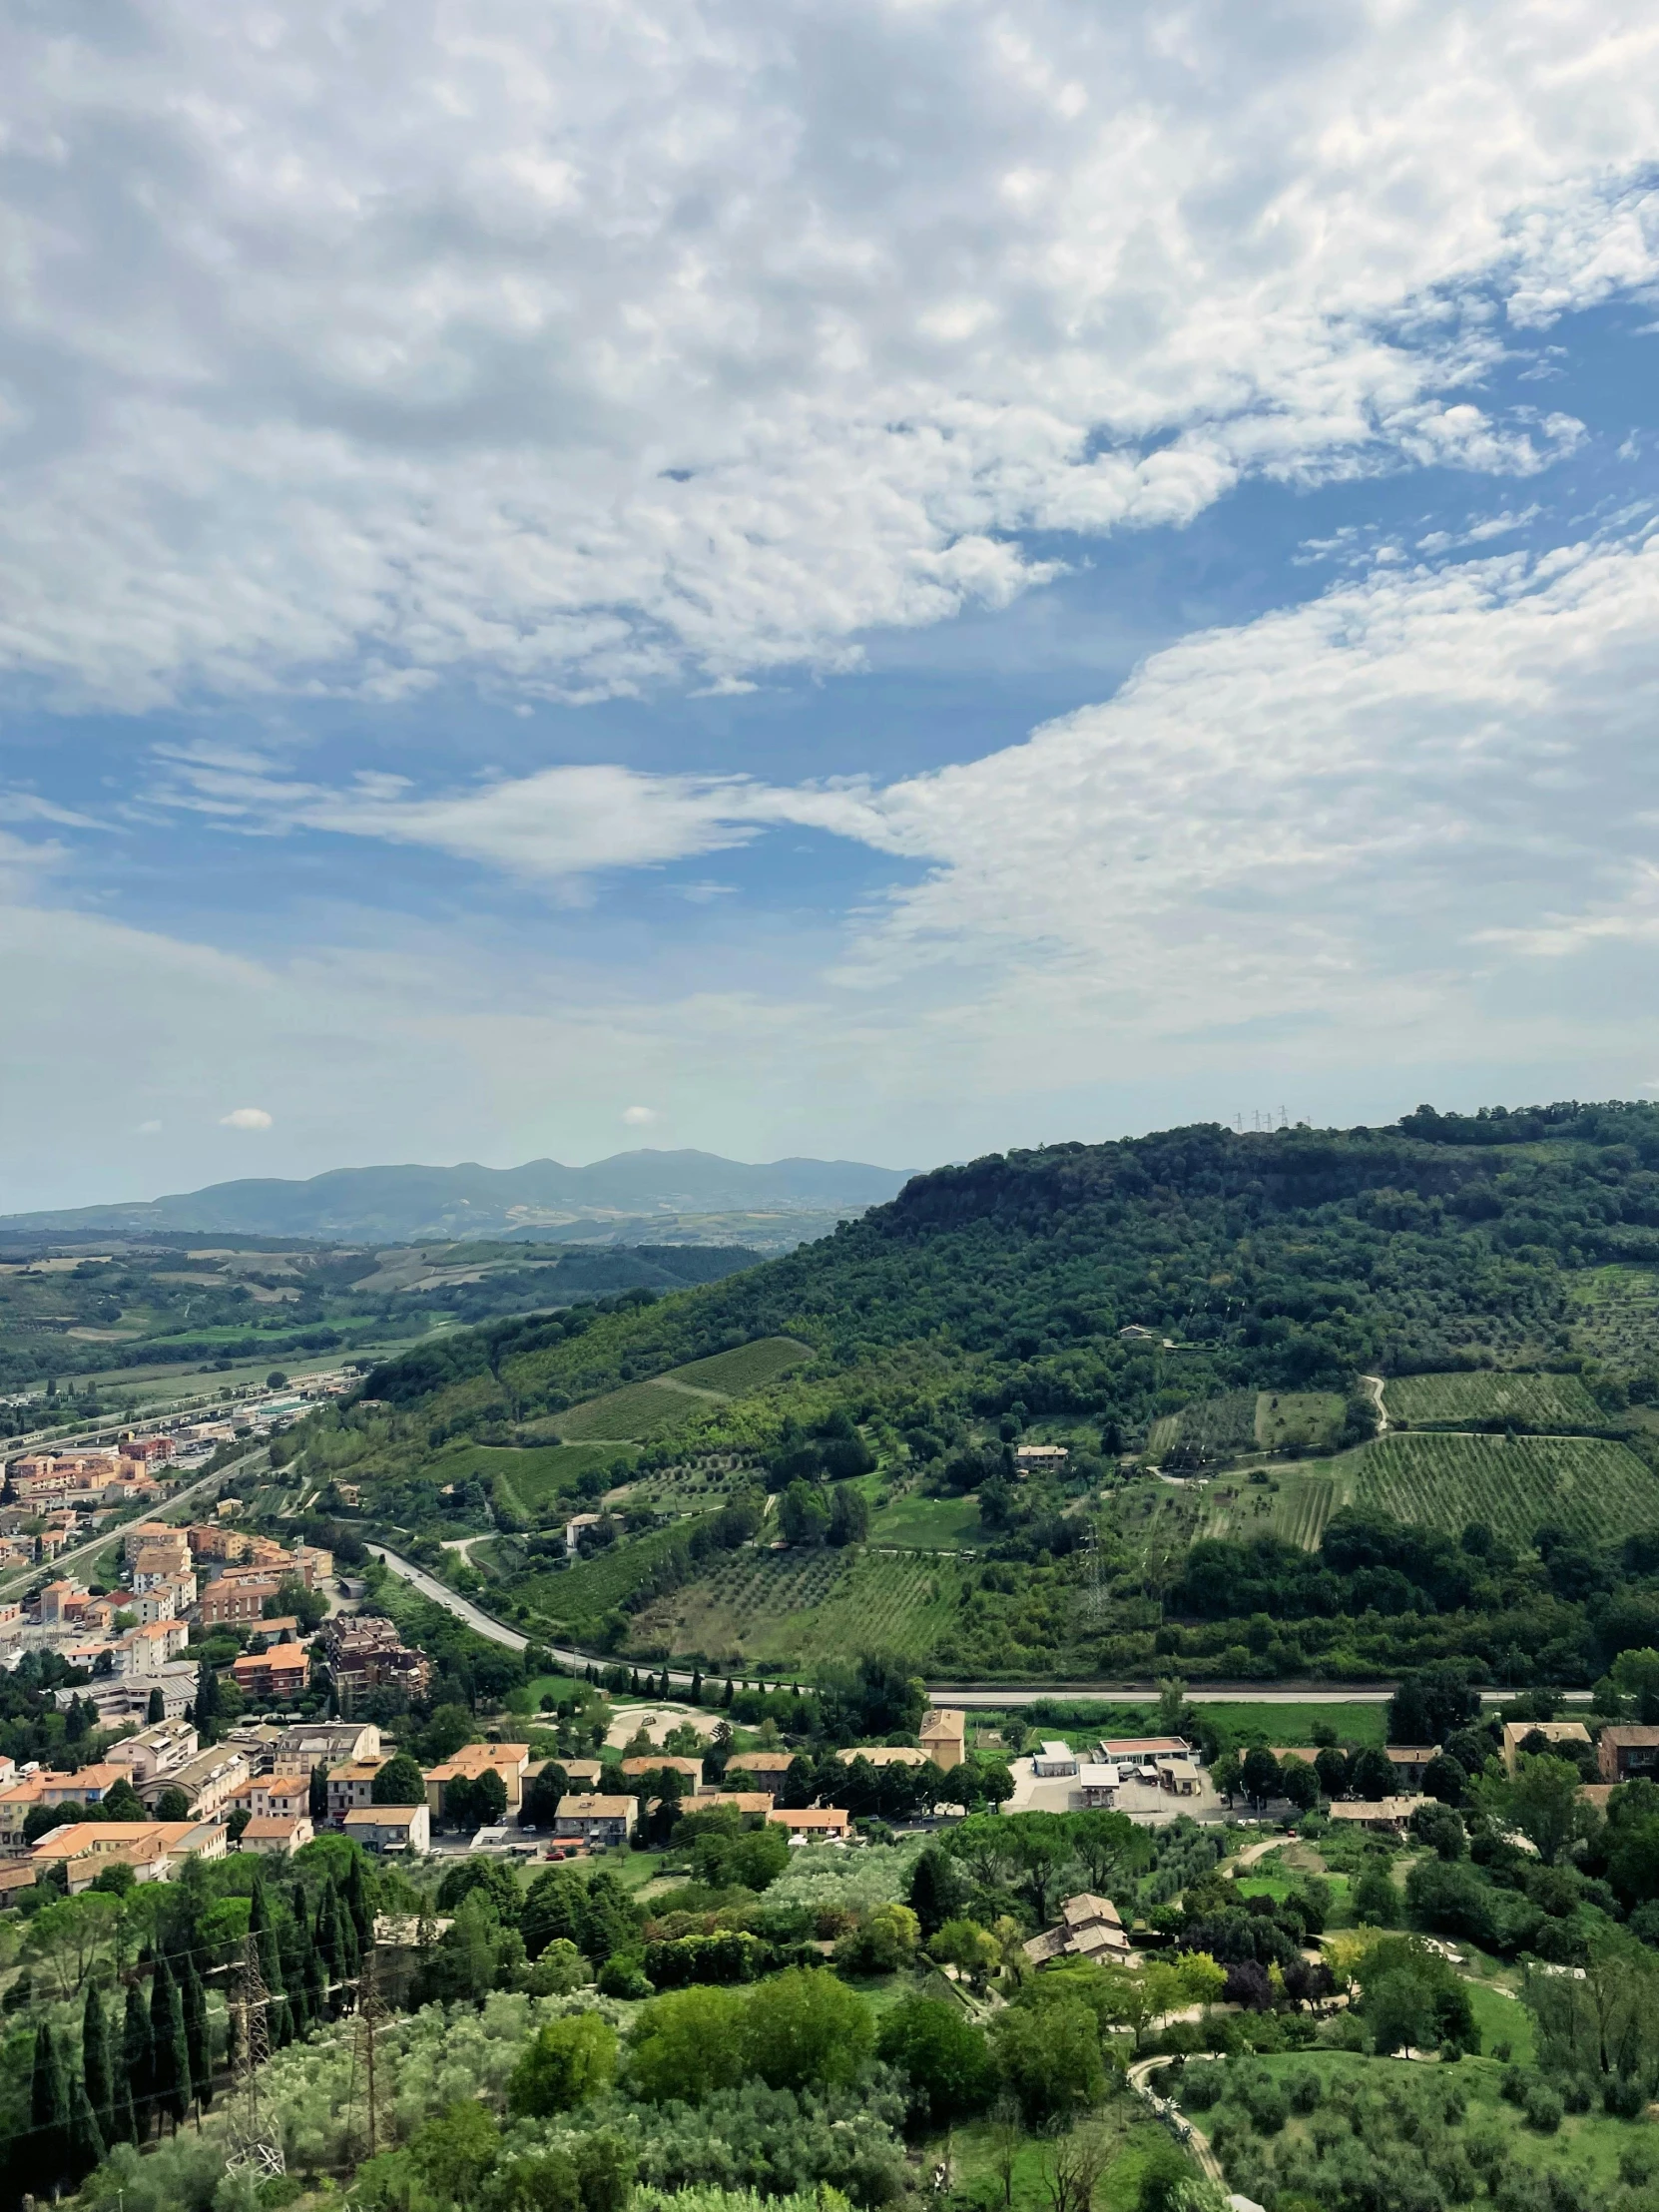 a hilly area with lush green trees and a town on the horizon